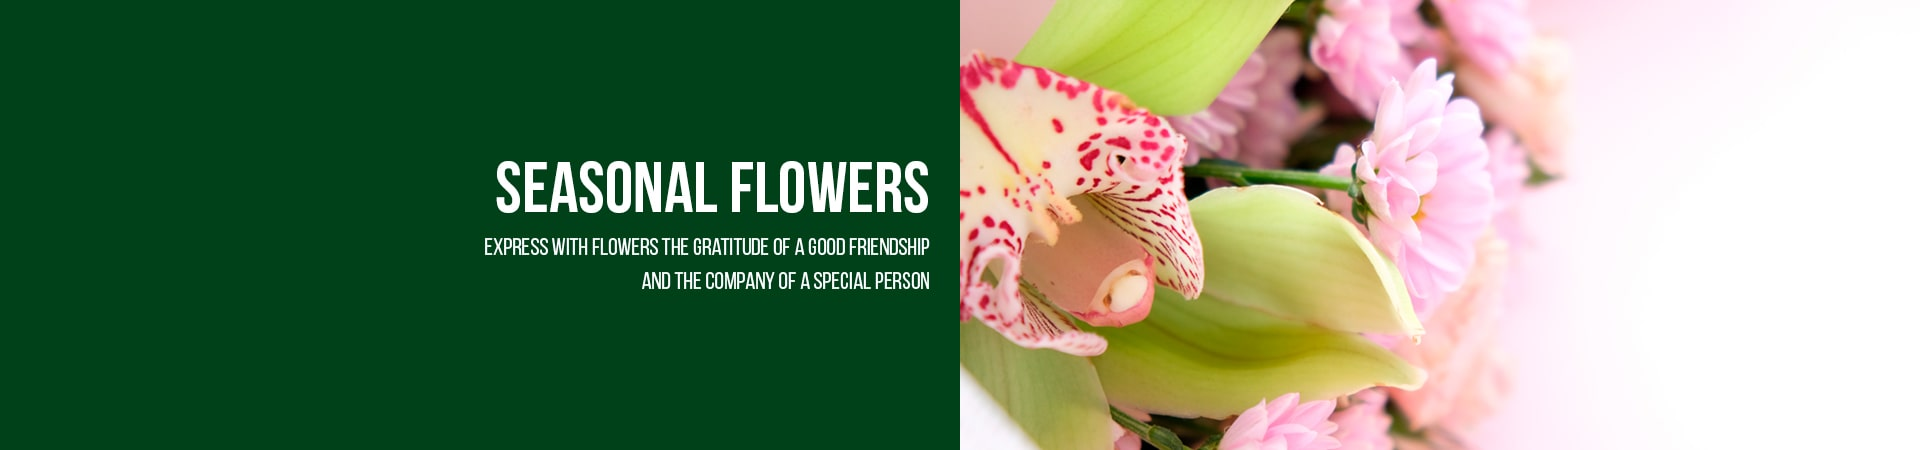 Roses, Lilies, Sunflowers, Seasonal Flowers. Our florist designs and prepares that special arrangement with seasonal flowers for you, we deliver locally in Orlando, FL. Fresh Flowers Orlando